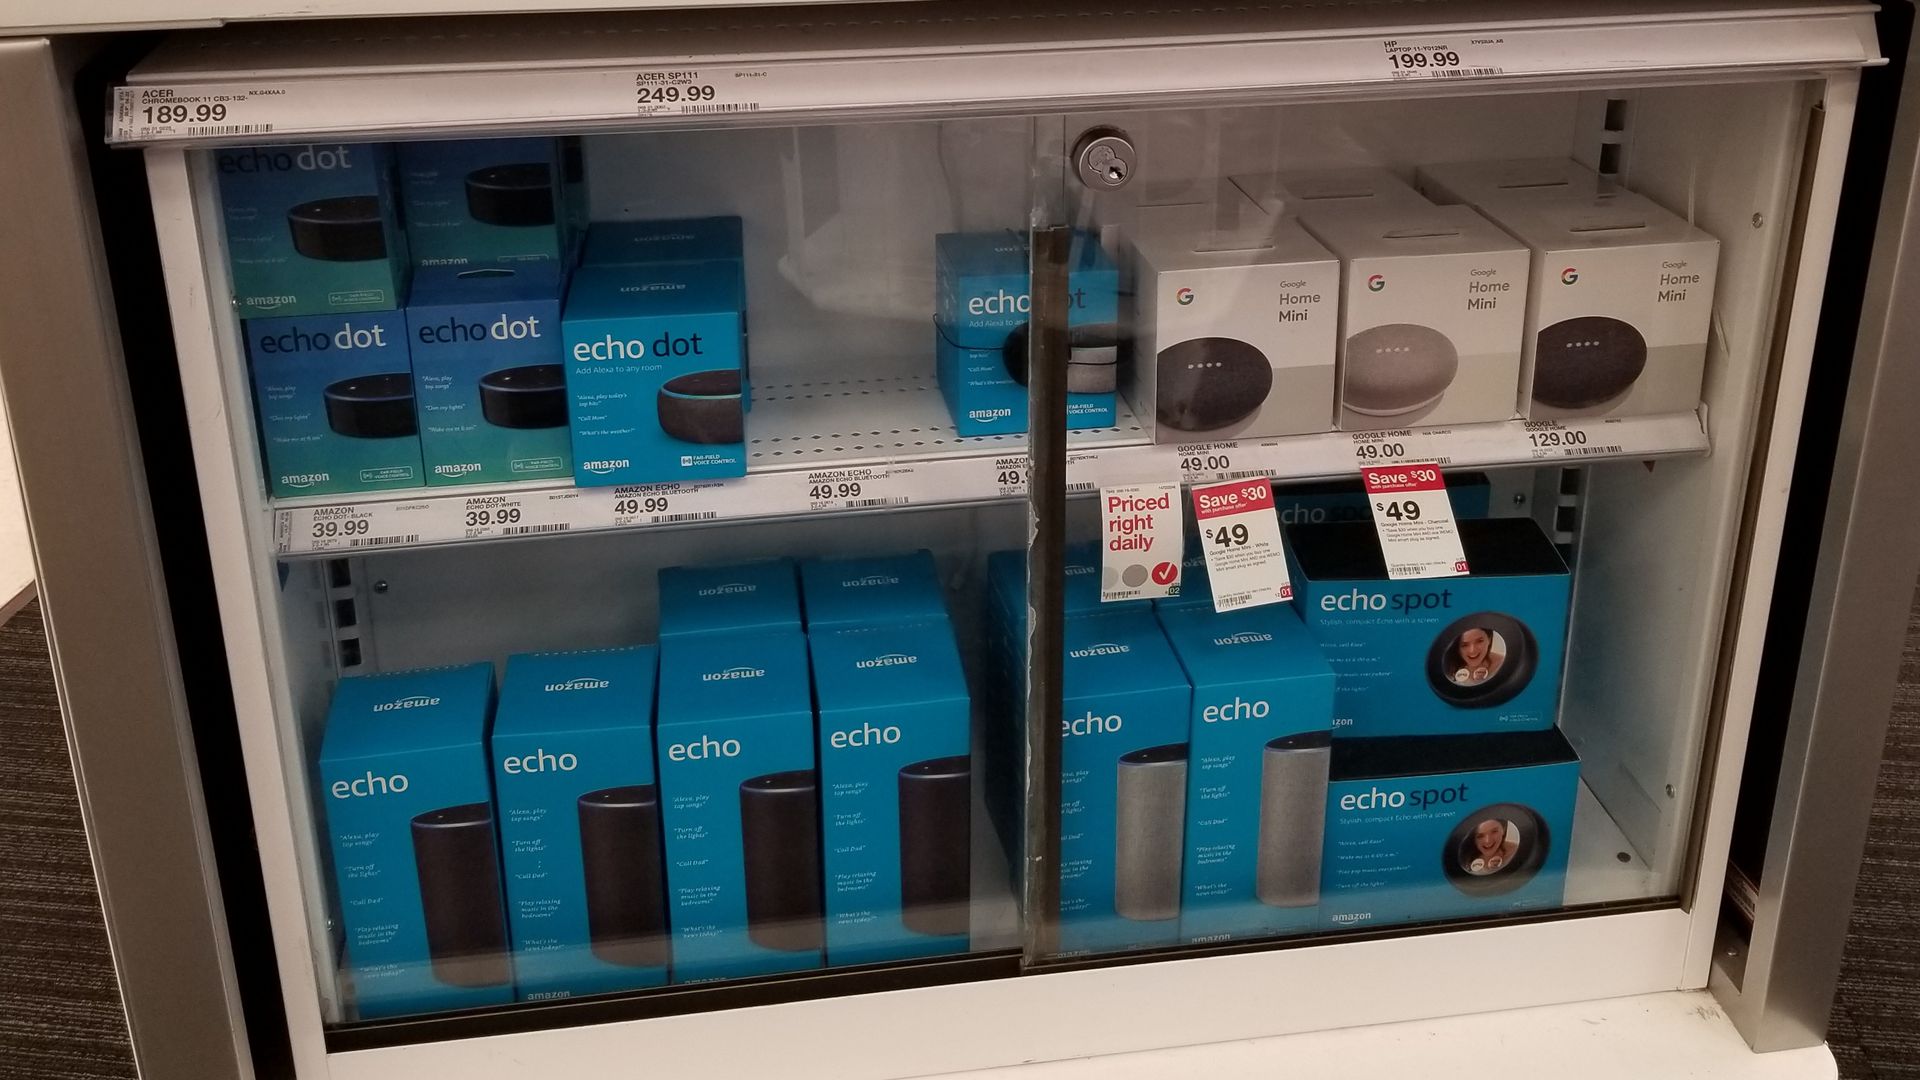 Case of Amazon Alexa products in a store